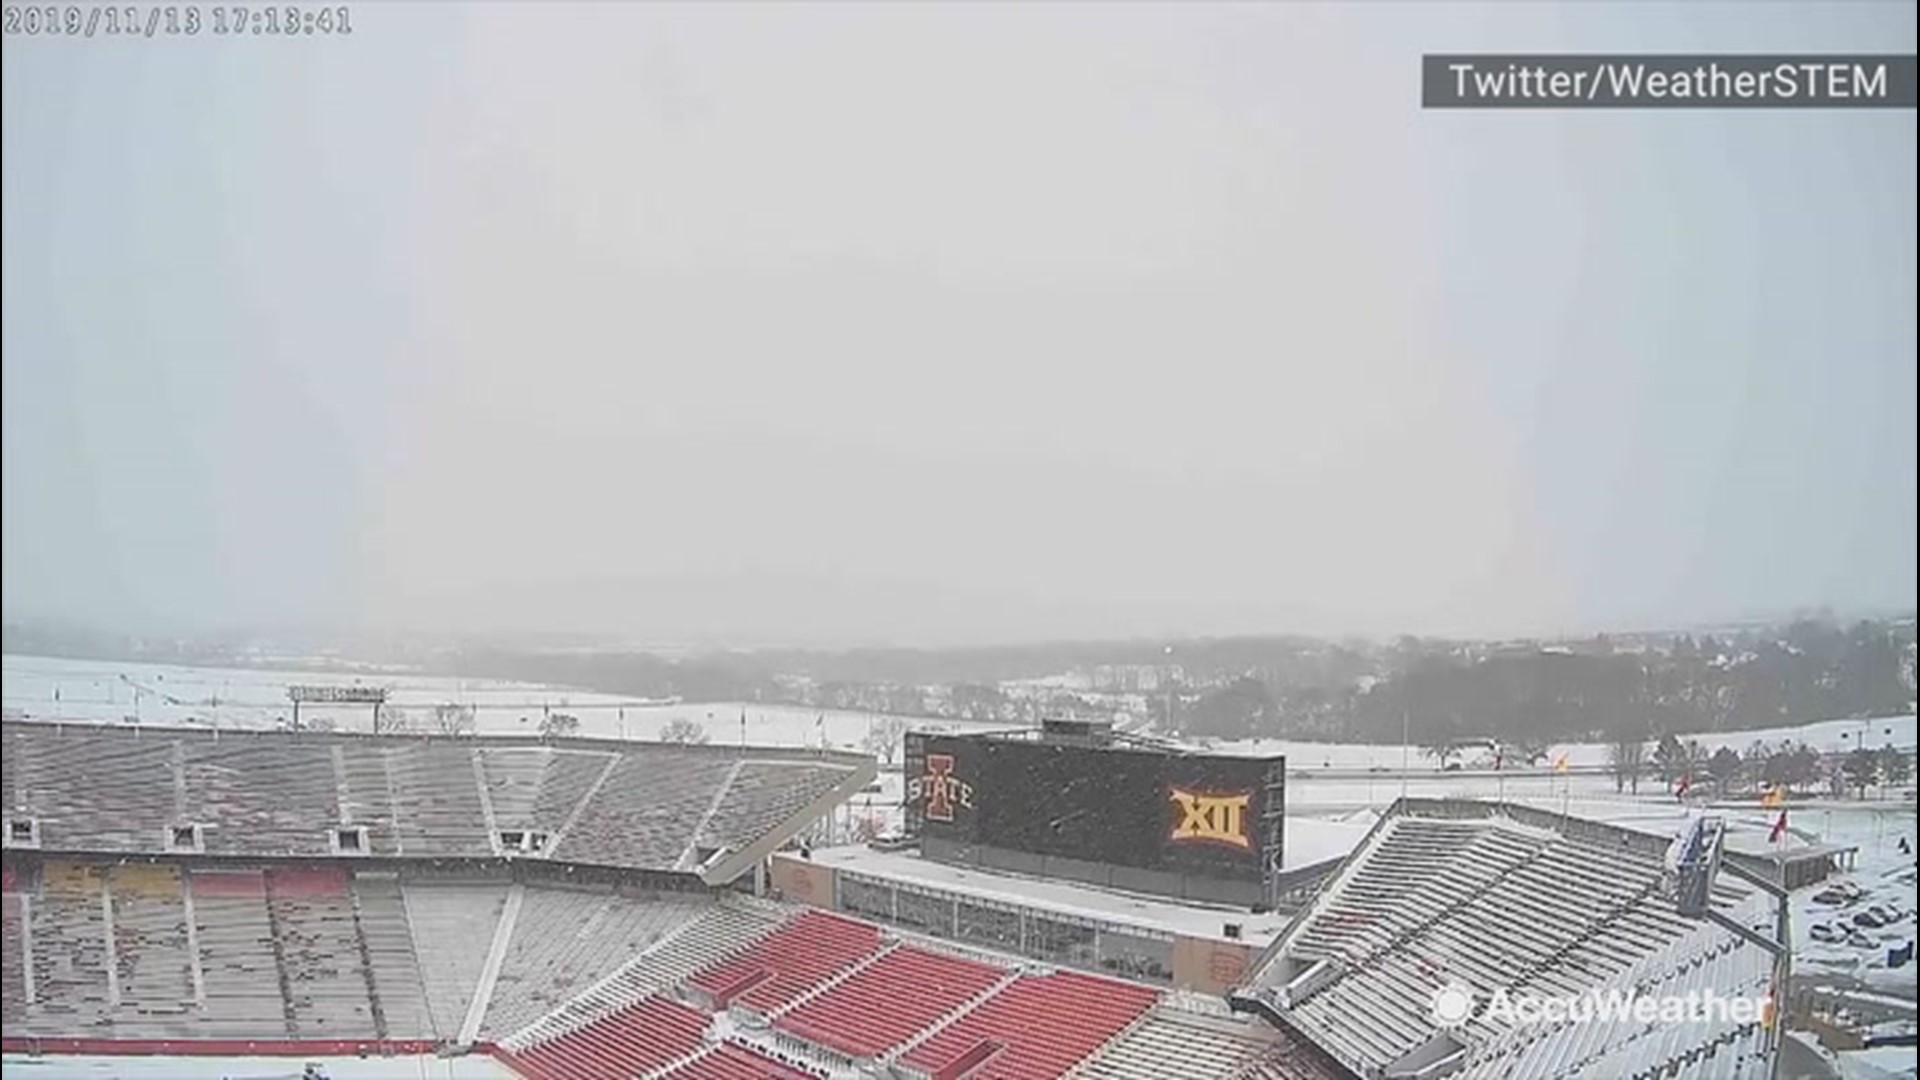 Winter has come early in Ames, Iowa, as Jack Trice Stadium is seen completely buried in snow on Nov. 13.